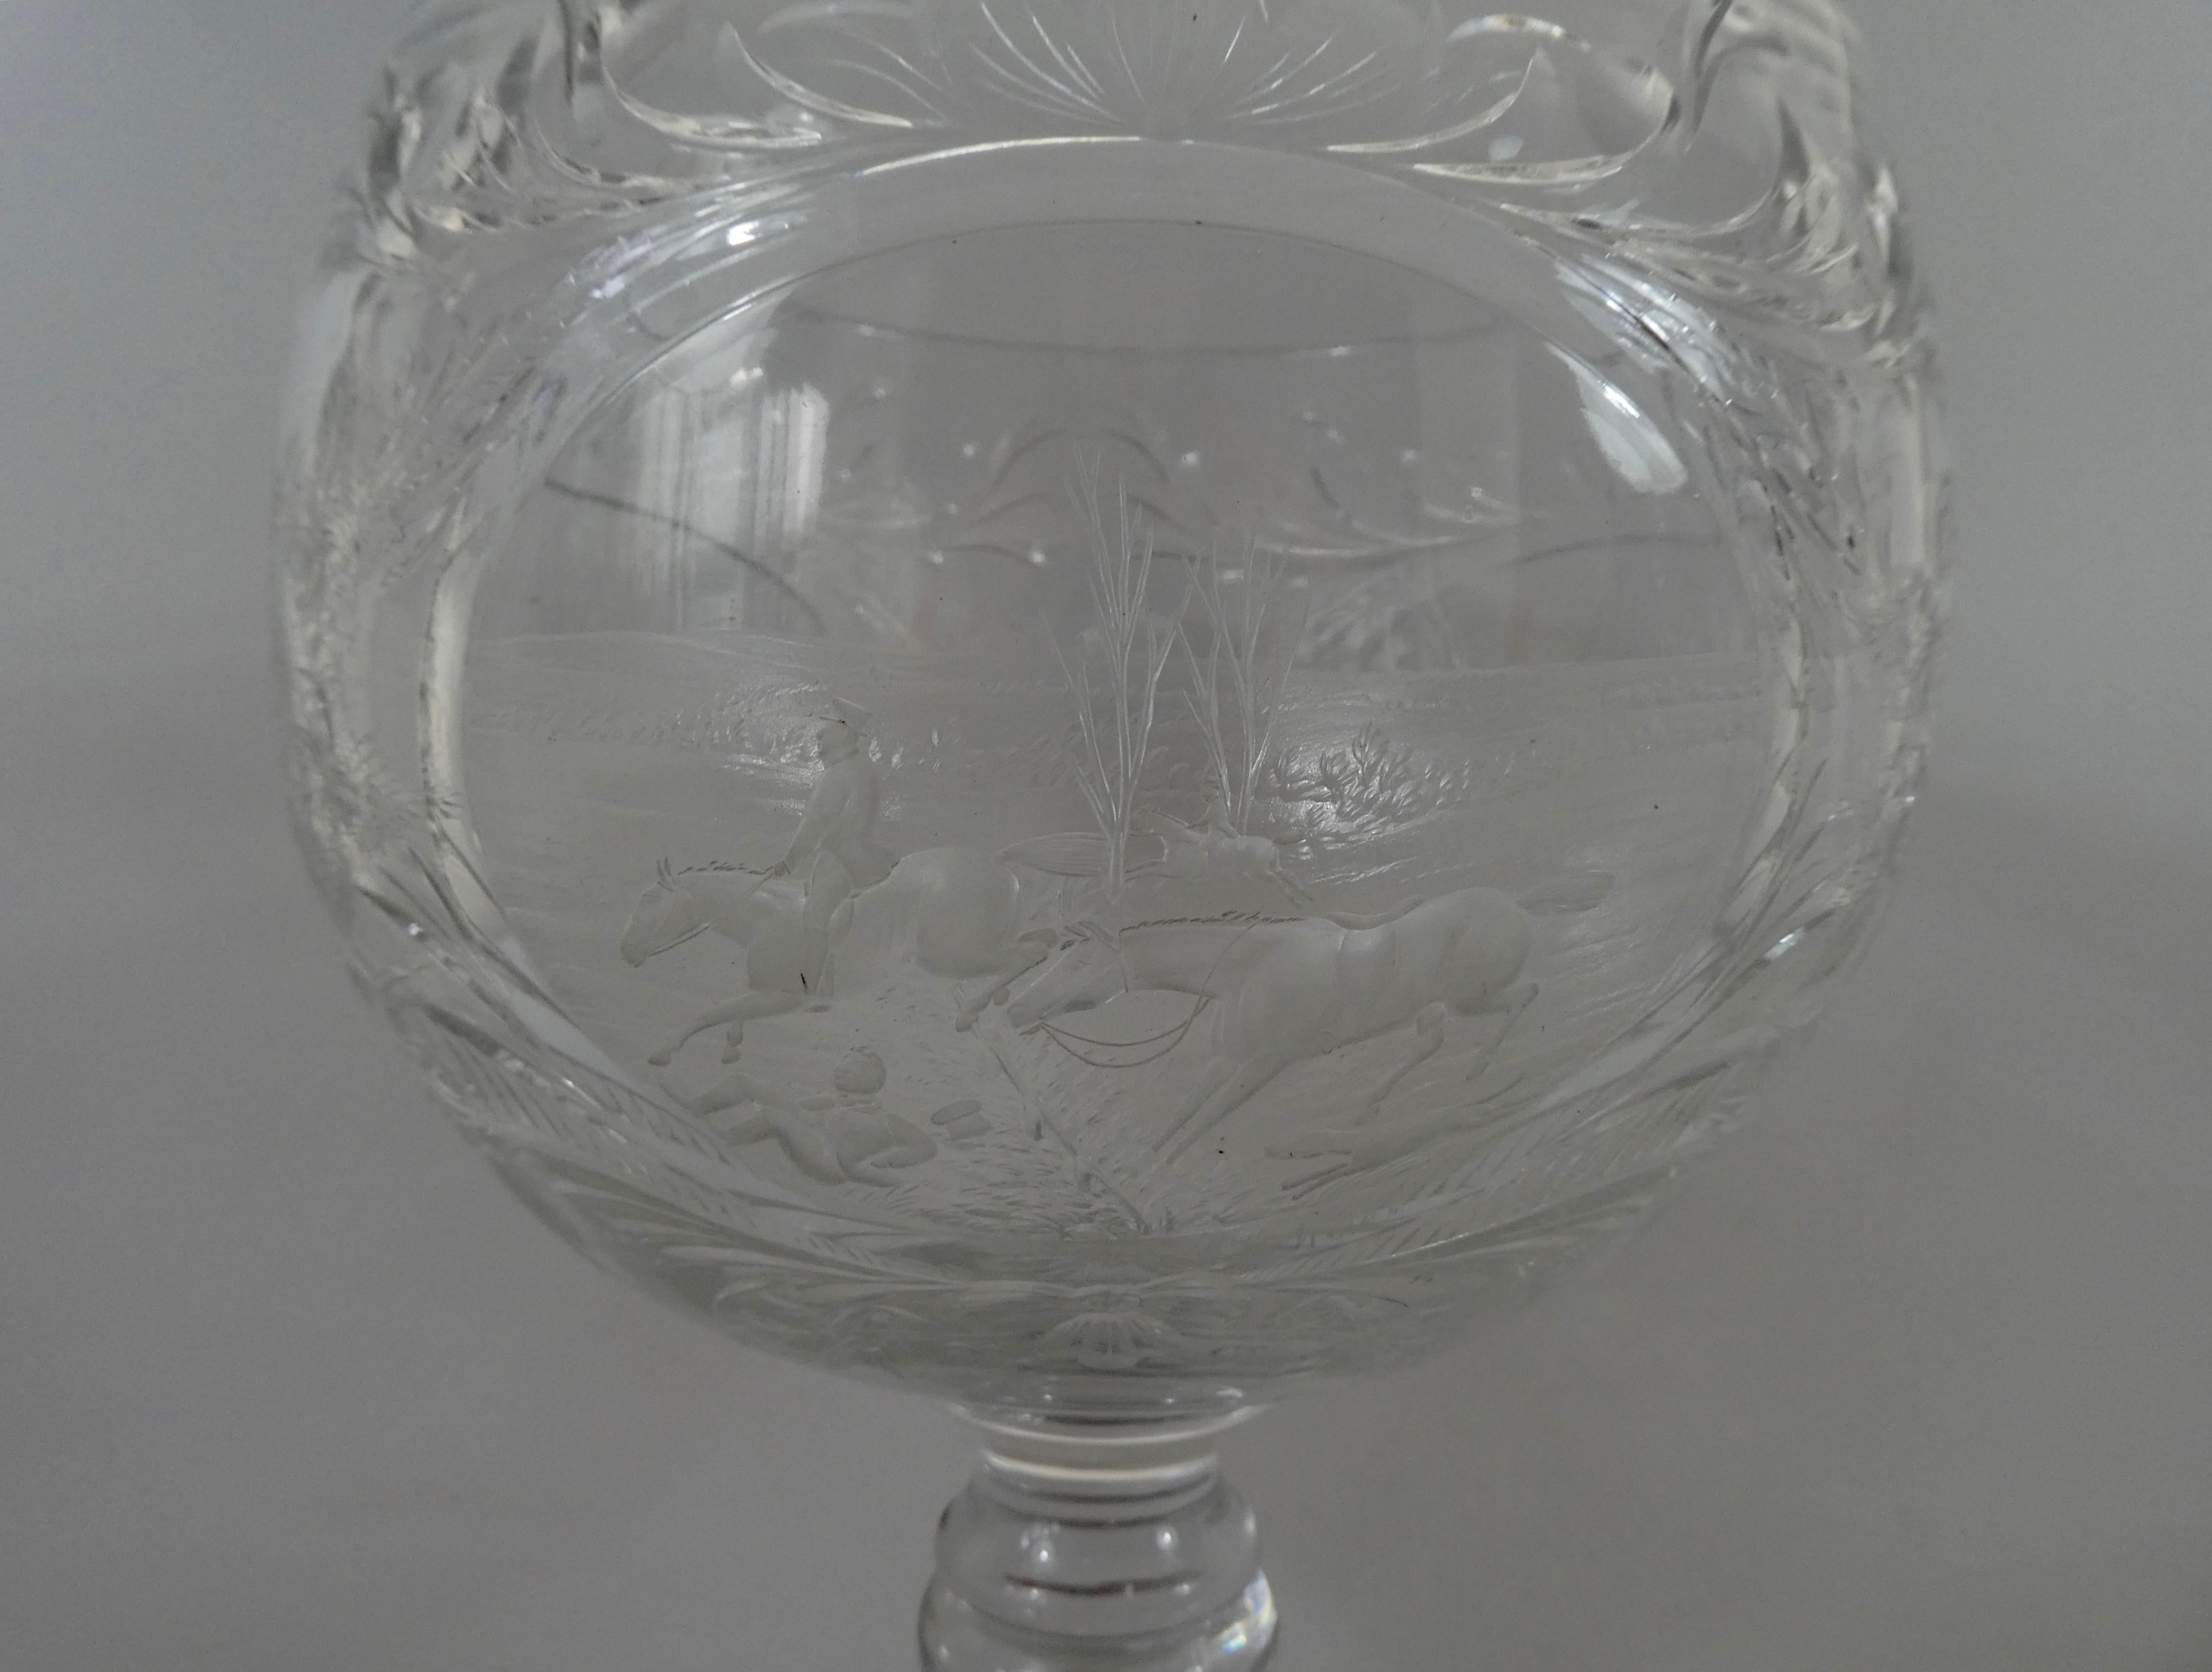 A fine and rare Thomas Webb and Corbett Ltd glass goblet, circa 1930, signed W.G. Webb. Finely engraved with three panels depicting hunting scenes. The first with huntsmen on horses and hounds leaping over a hedge and signed W.G. Webb. The second